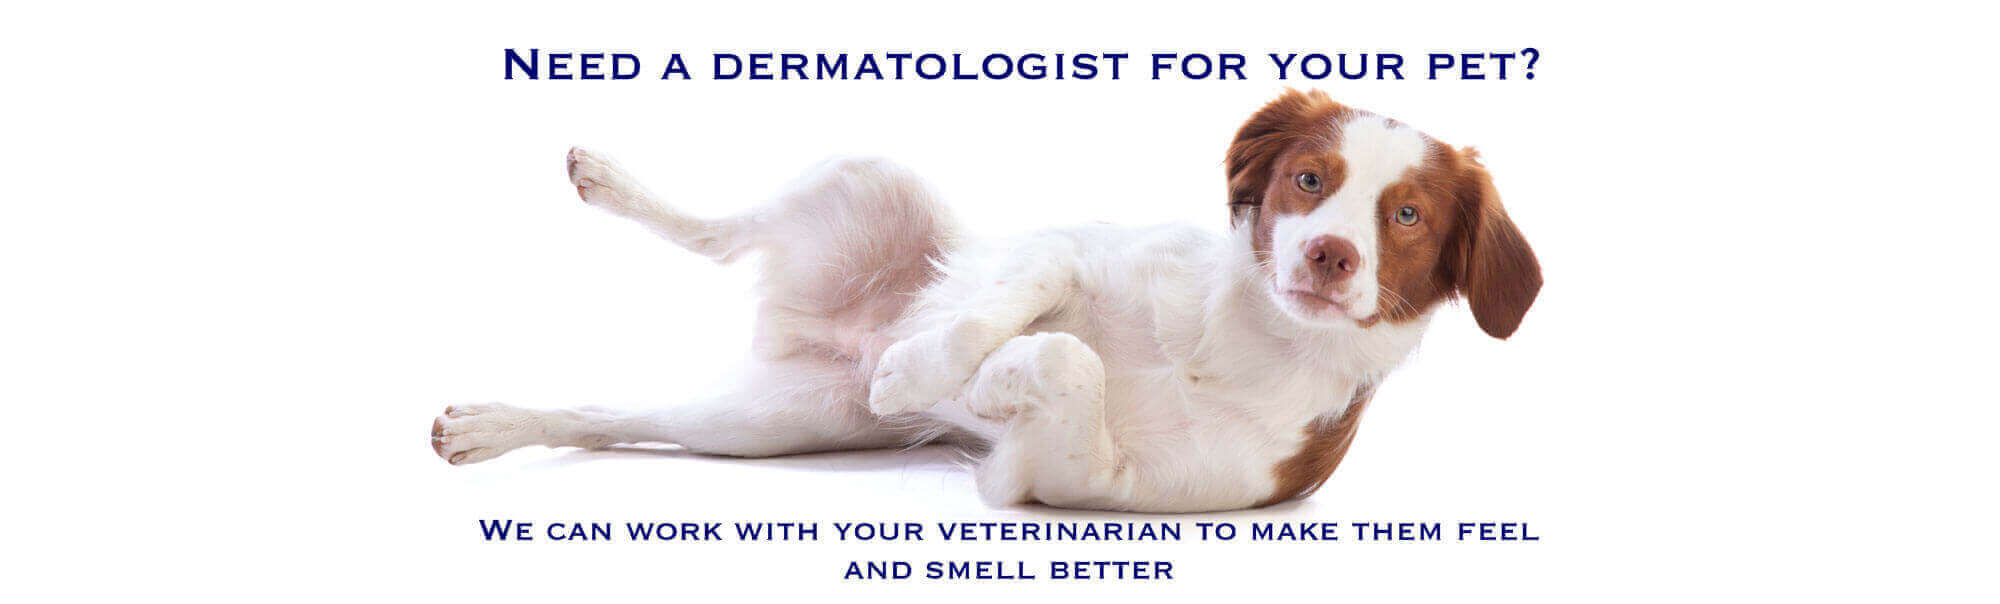 4 Vet Dermatologist, Skin Vet, Allergies, Skin Infections, Ear Infections, Itchy Skin